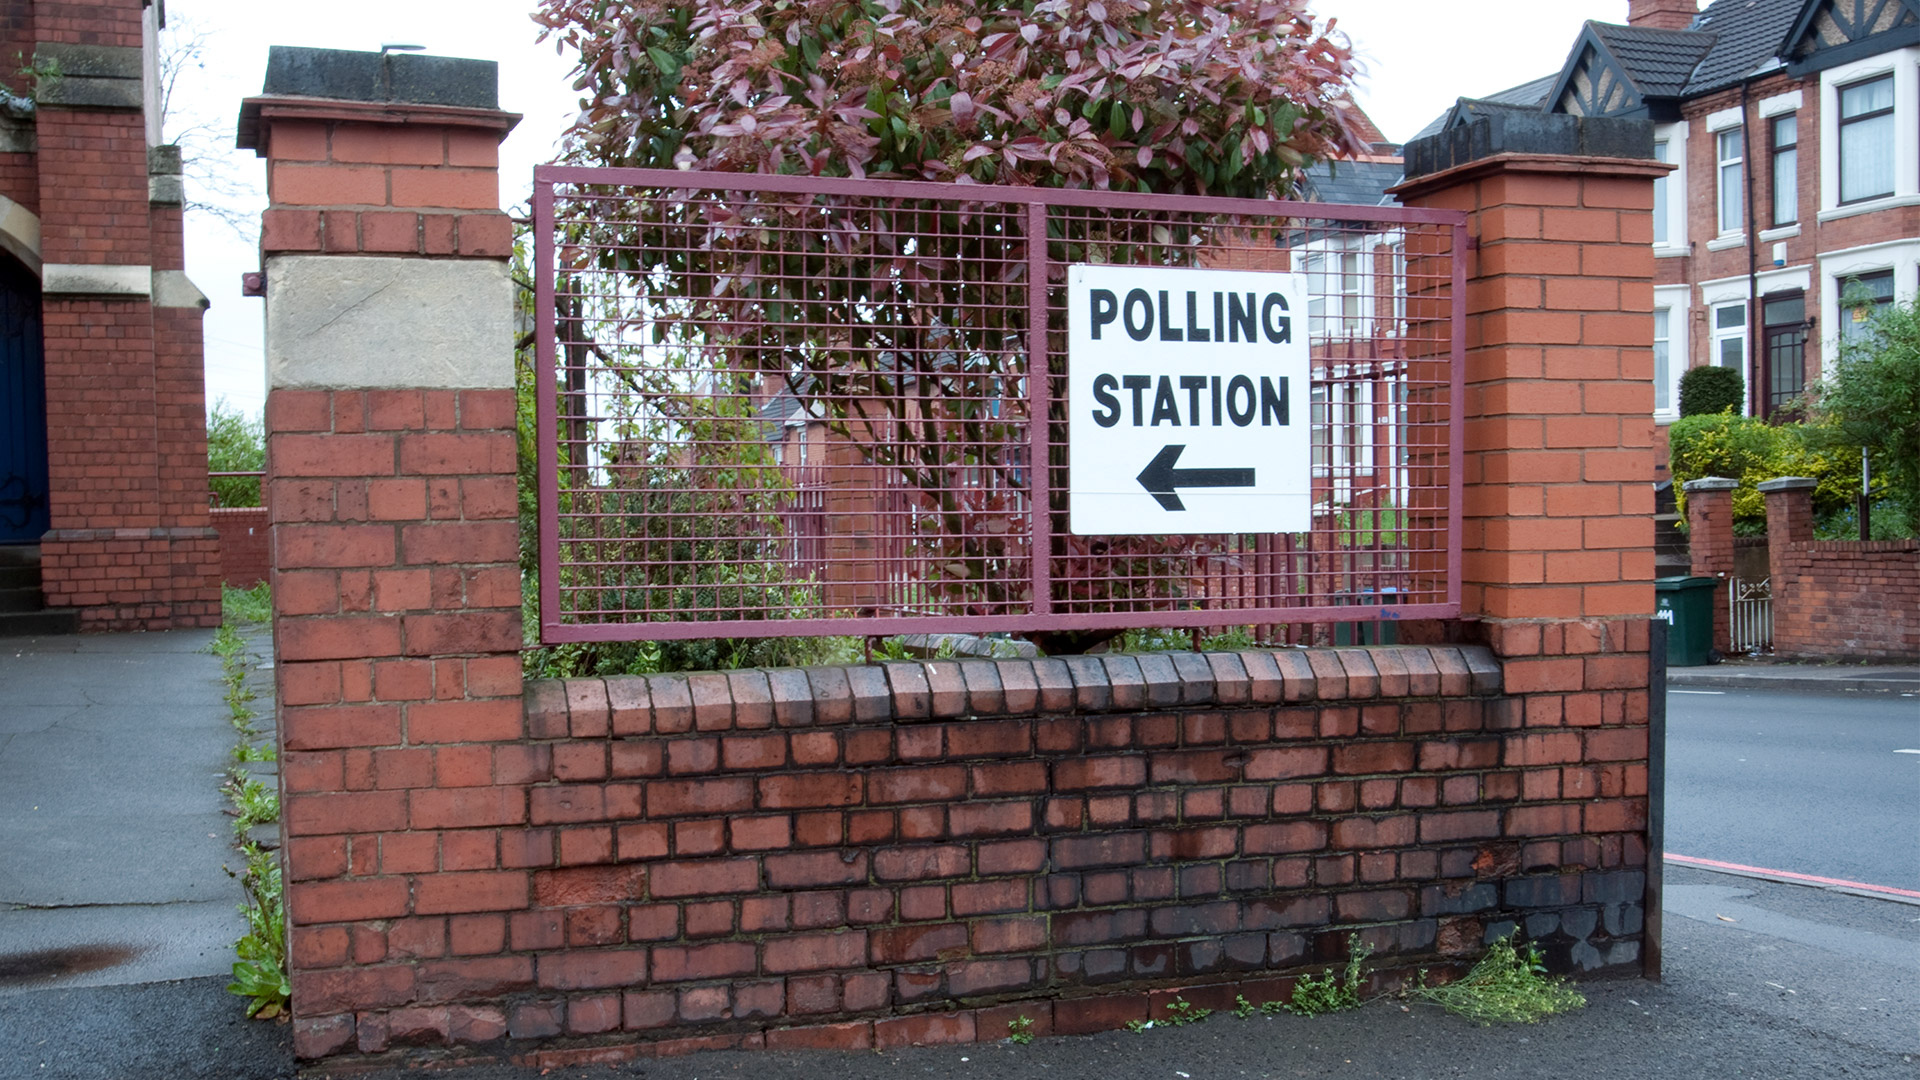 Polling station sign on building